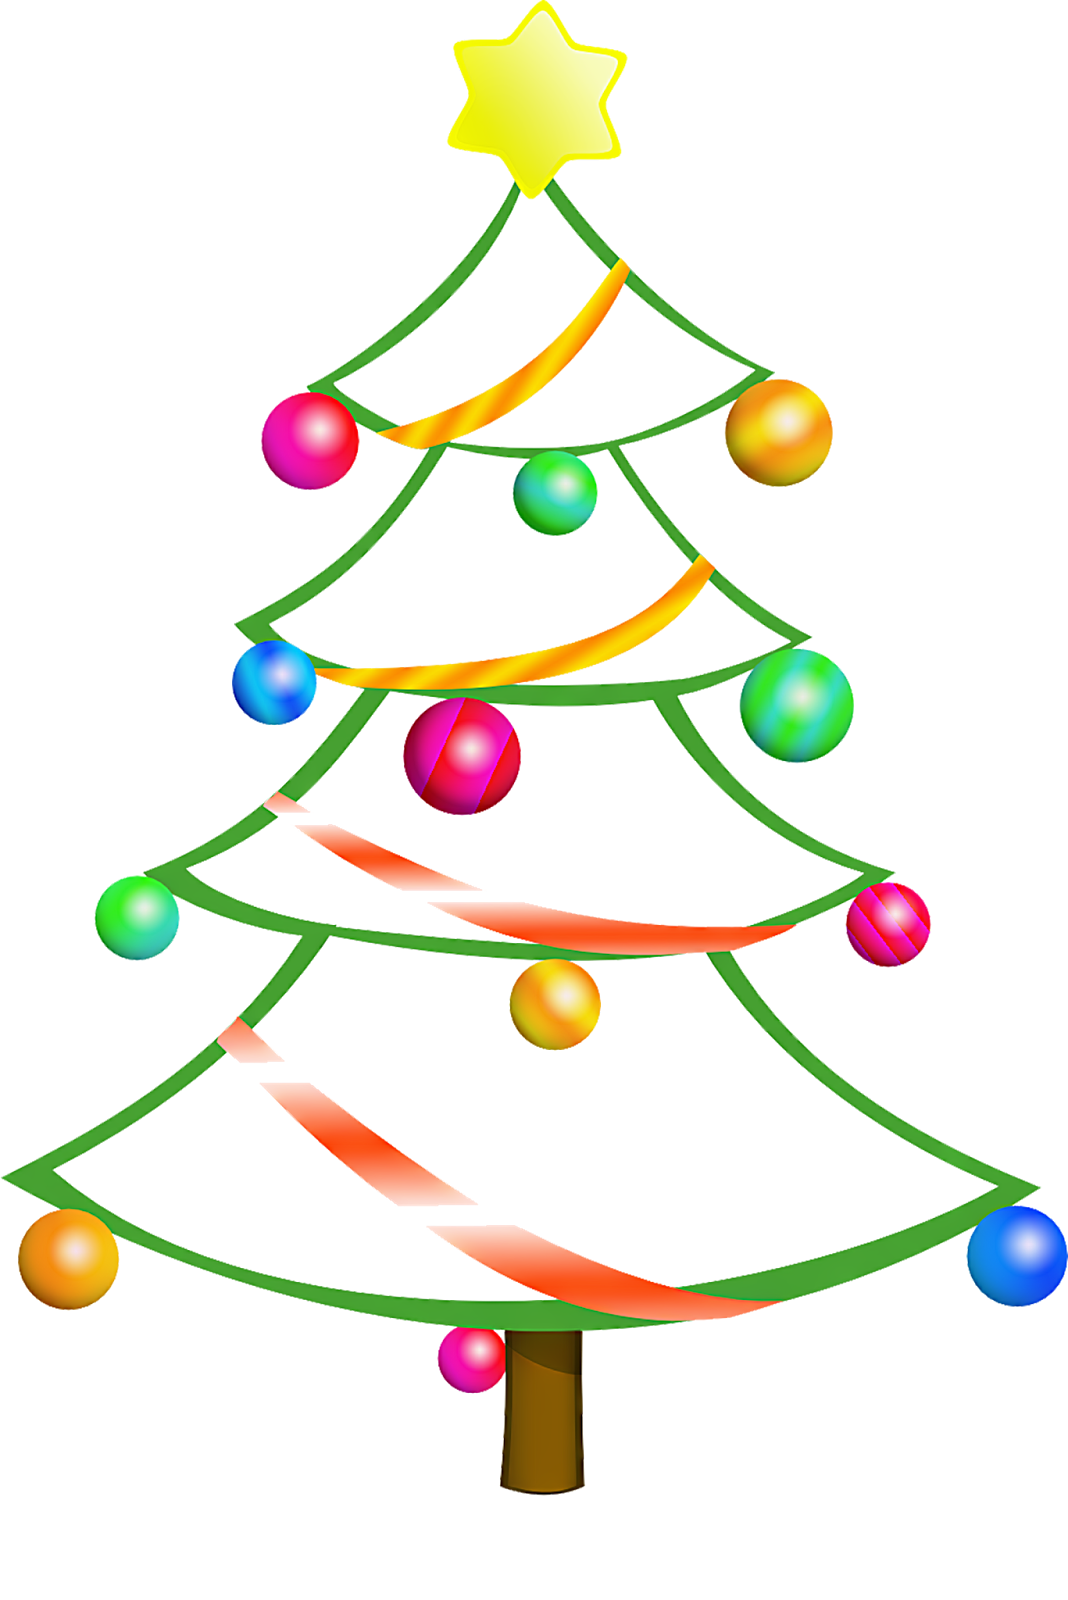 Merry Christmas Tree Clipart HD High Resolution For Greetings And